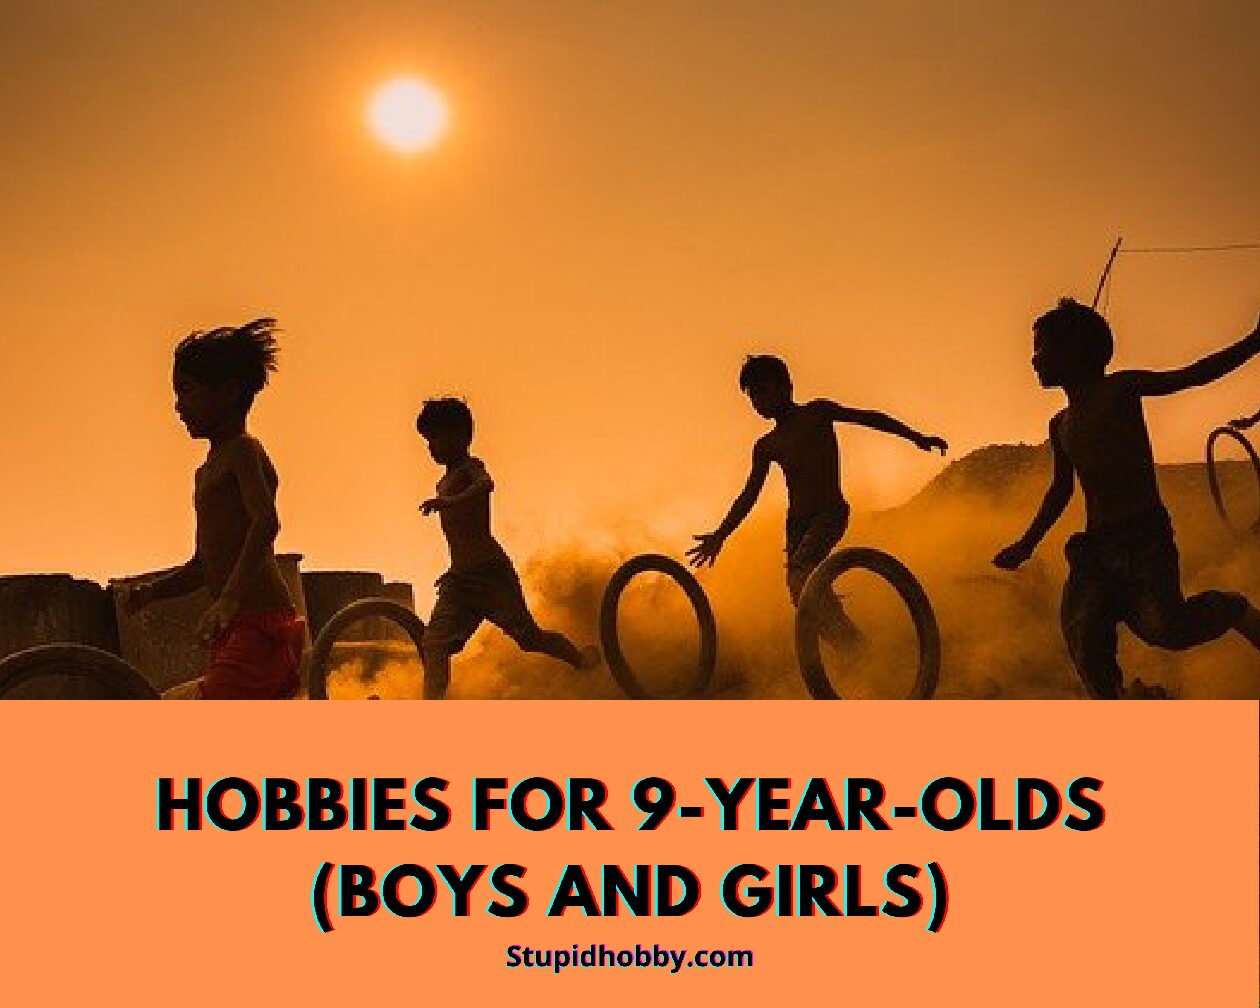 Hobbies For 9-Year-Olds (Boys and Girls)